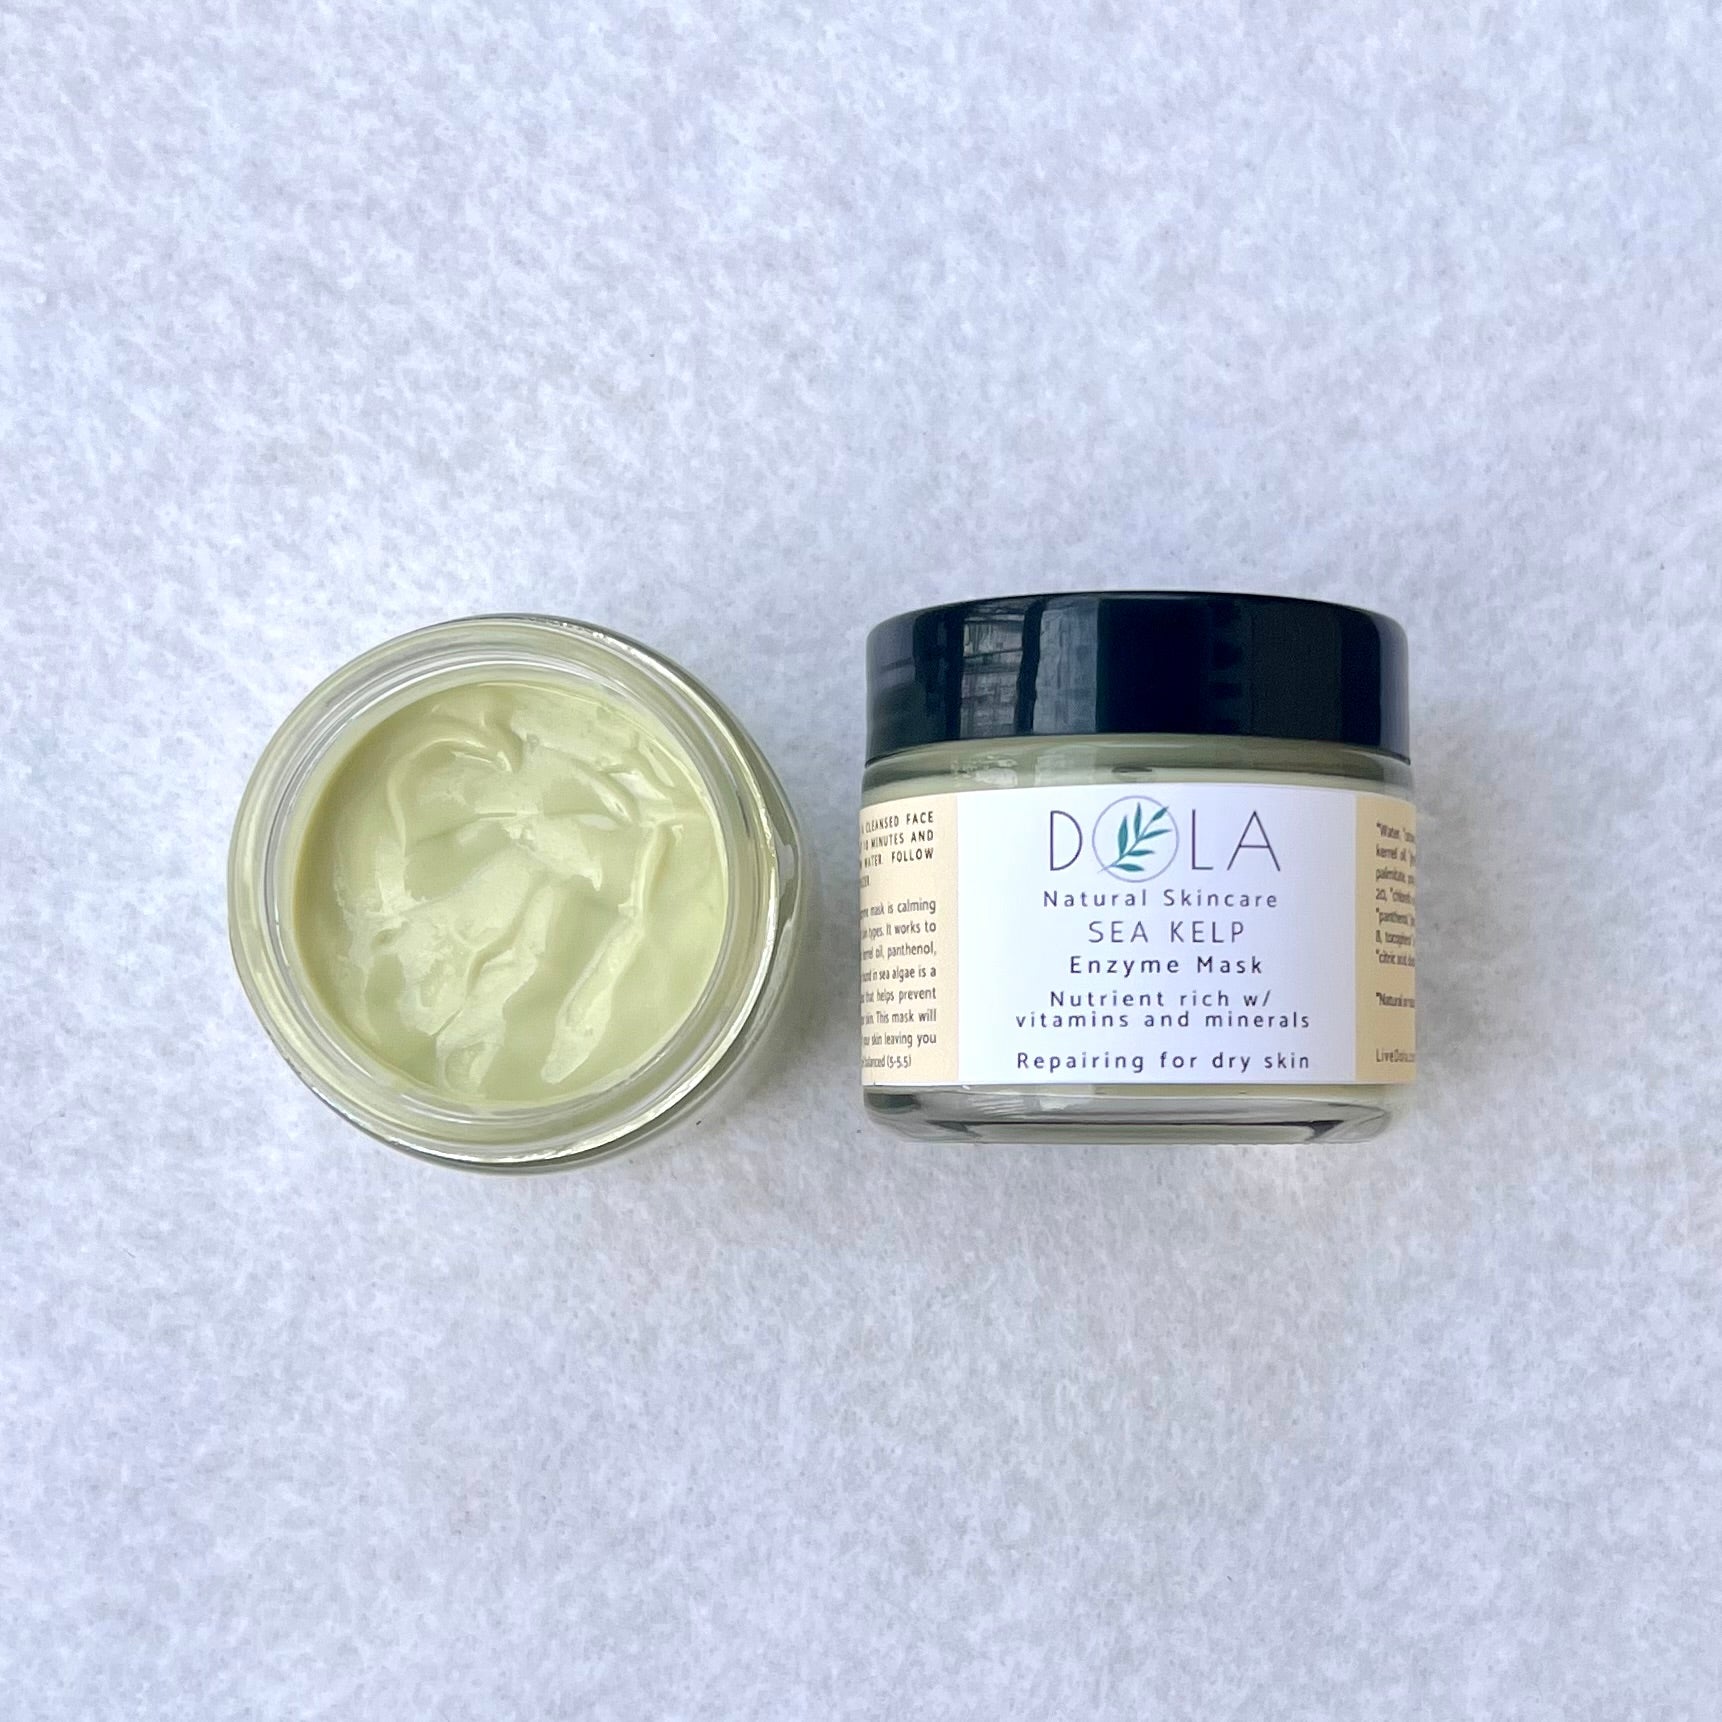 Sea Kelp Cream Mask for all skin (Nutrient rich w/ vitamins and minerals)